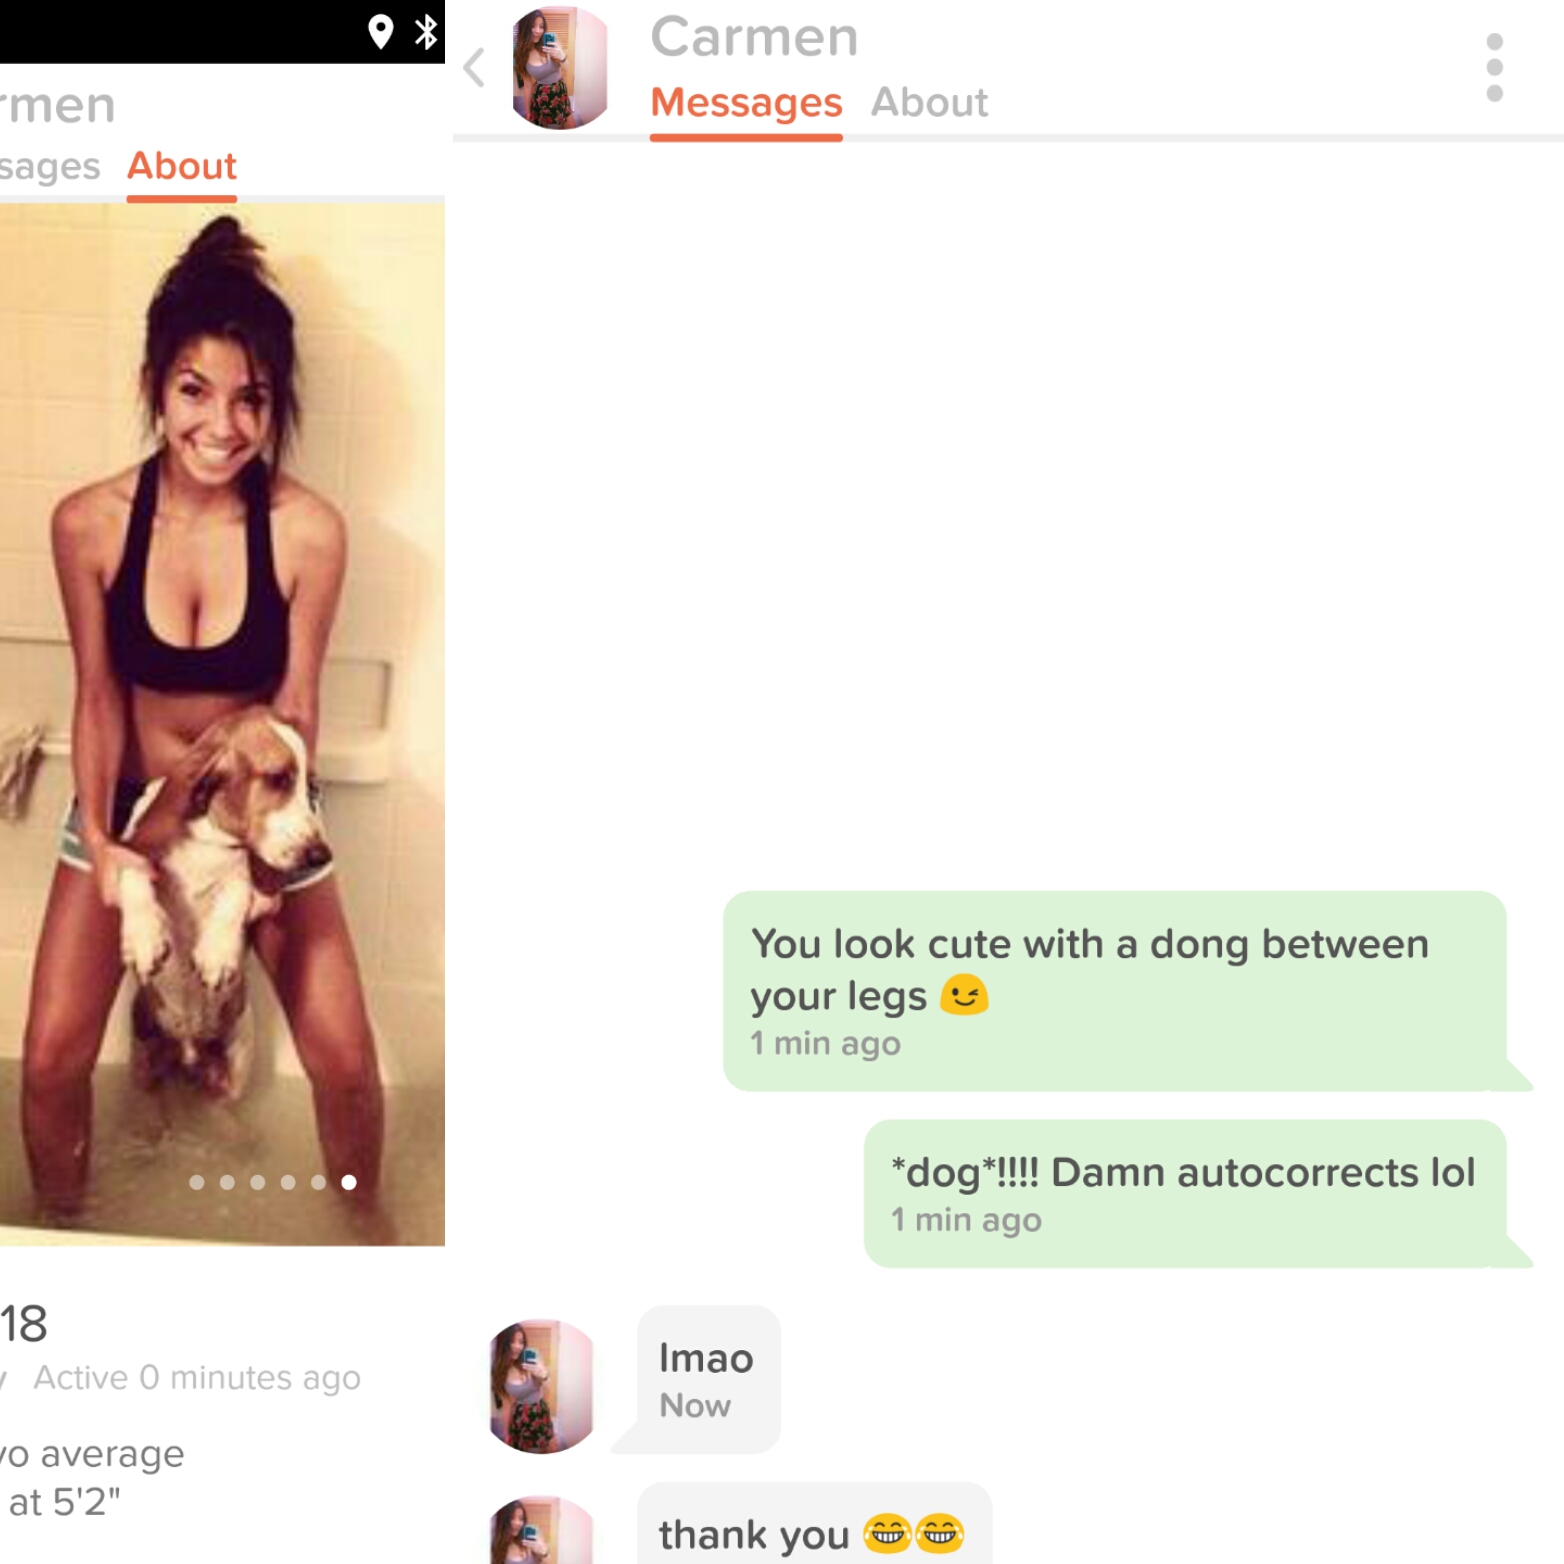 website - Carmen Messages About men sages About You look cute with a dong between your legs 1 min ago dog!!!! Damn autocorrects lol 1 min ago 18 Active 0 minutes ago Imao Now Ho average at 5'2" thank you